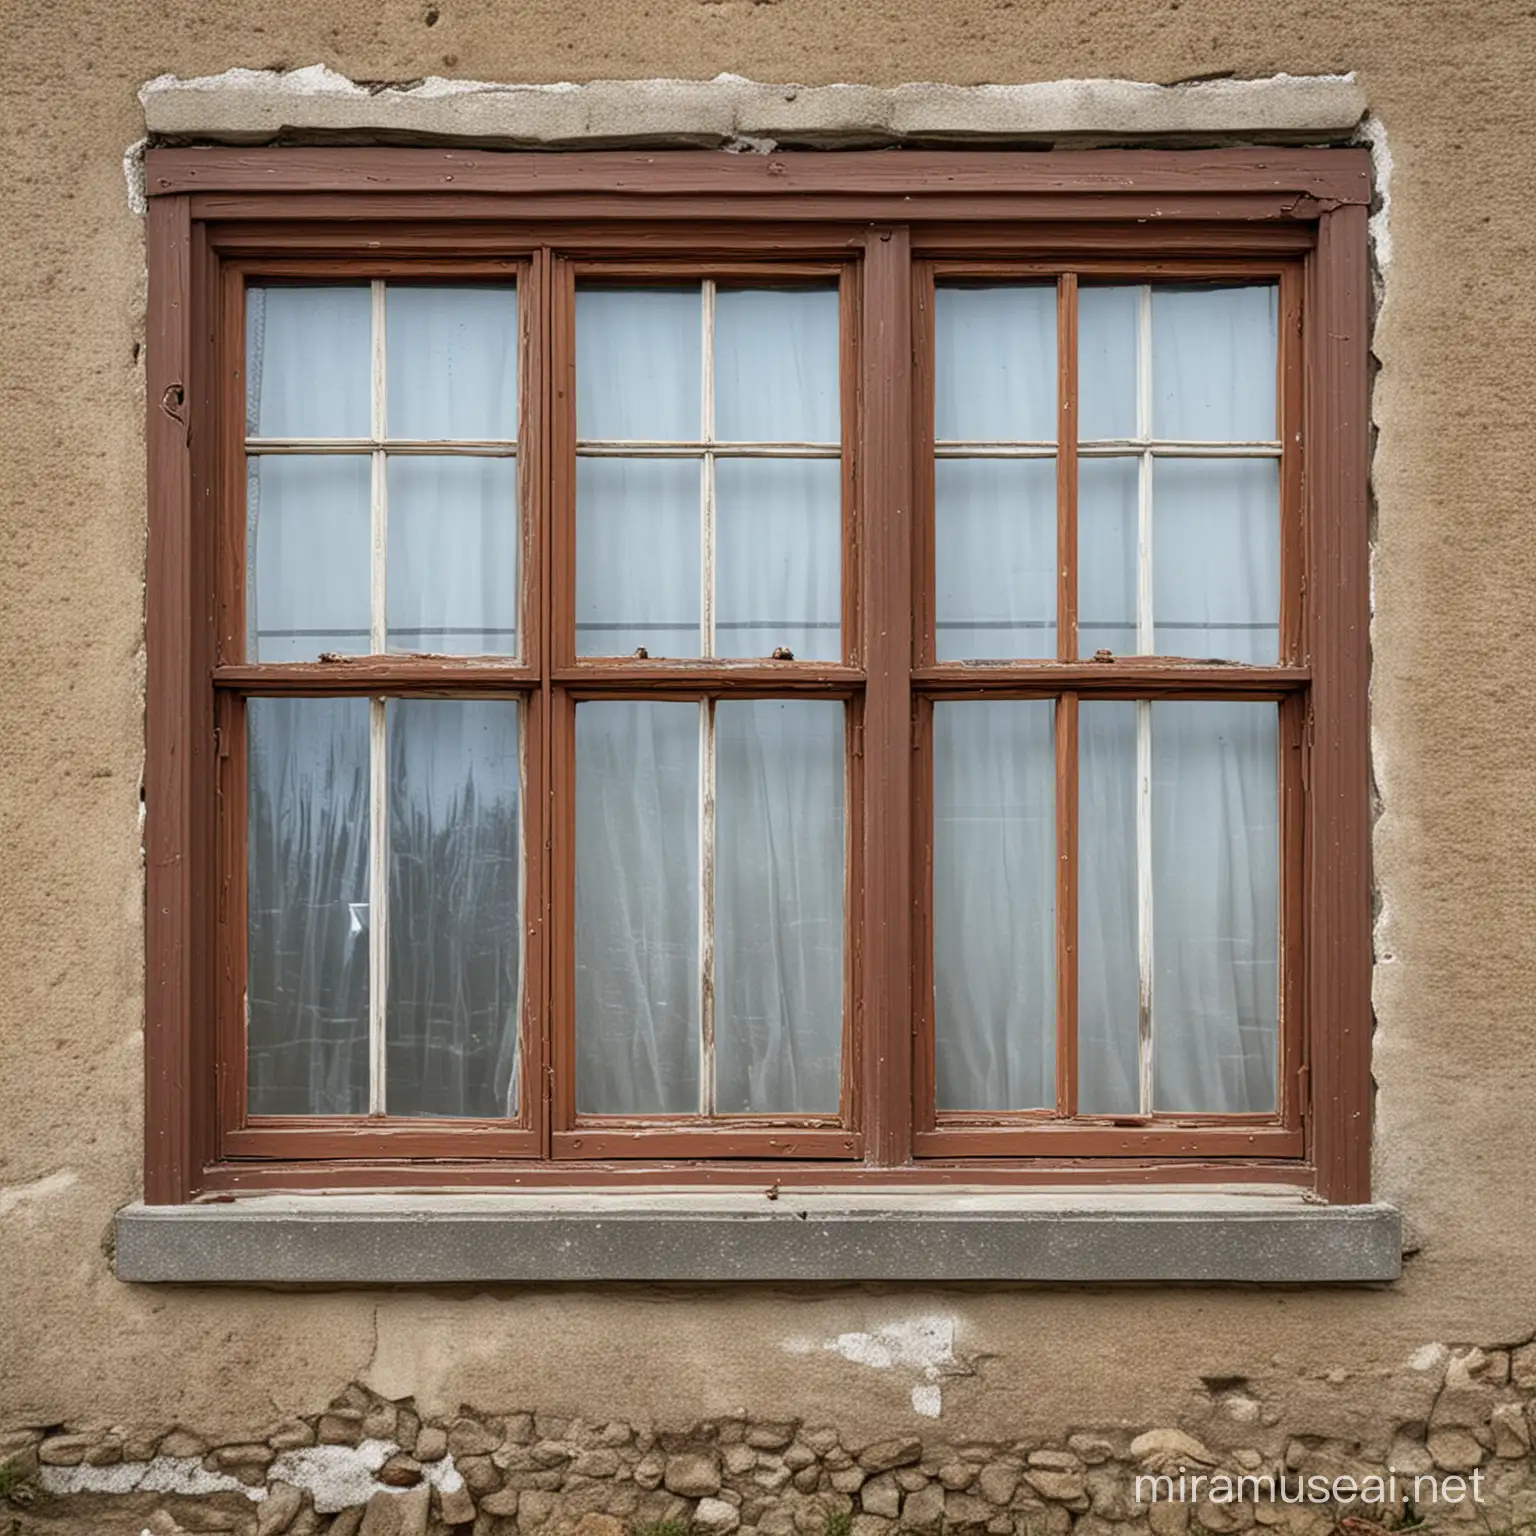 foto of an old windows on the left side and the new version of the same window on the right side on the picture.

